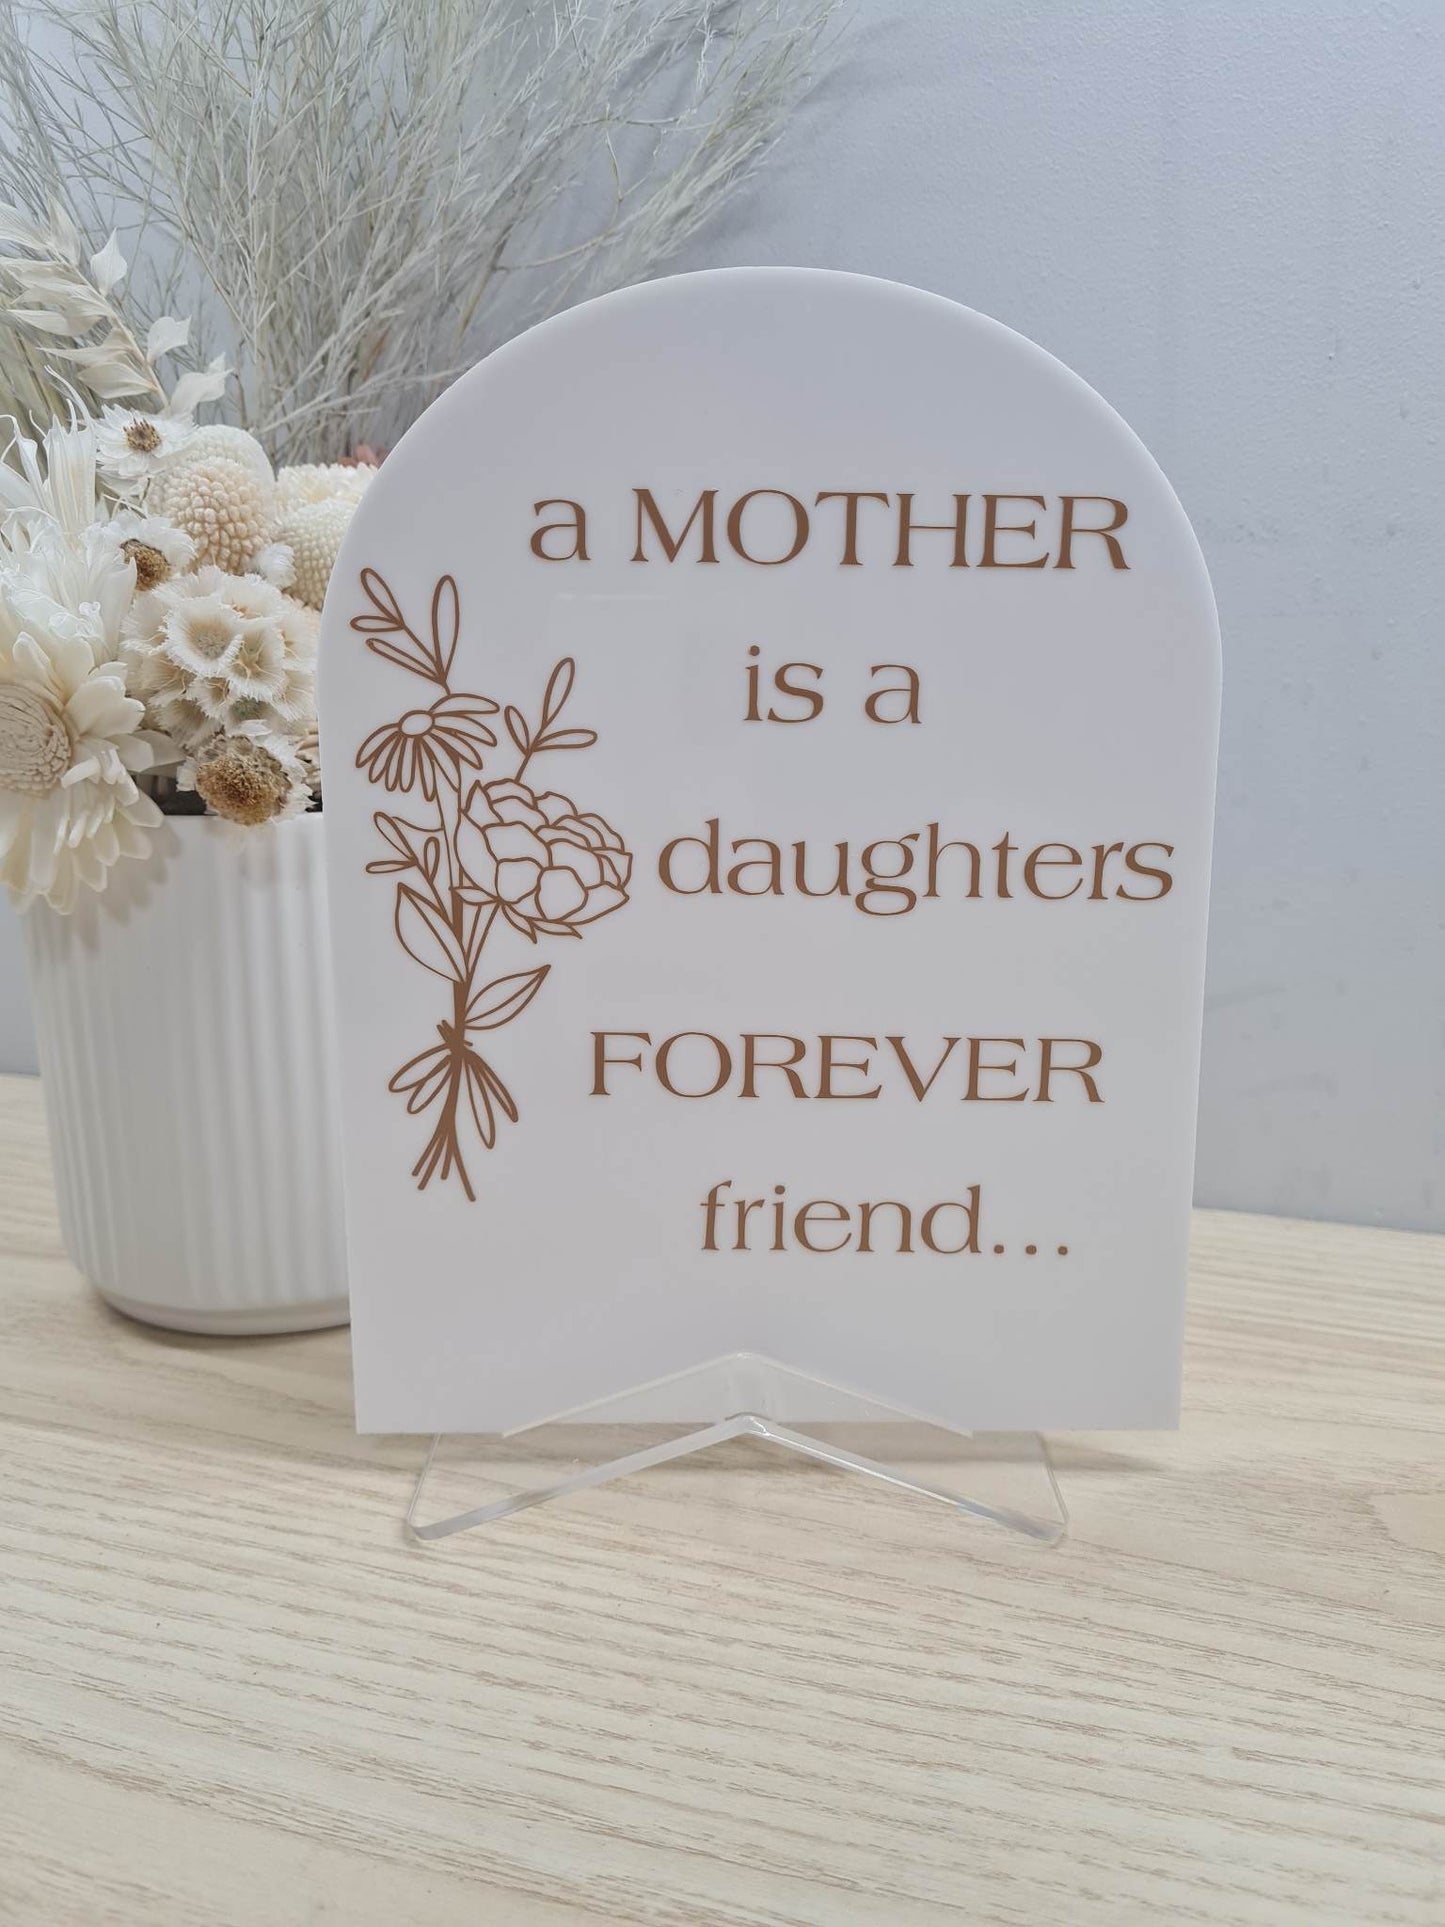 A Mother is a Daughters Forever Friend Plaque